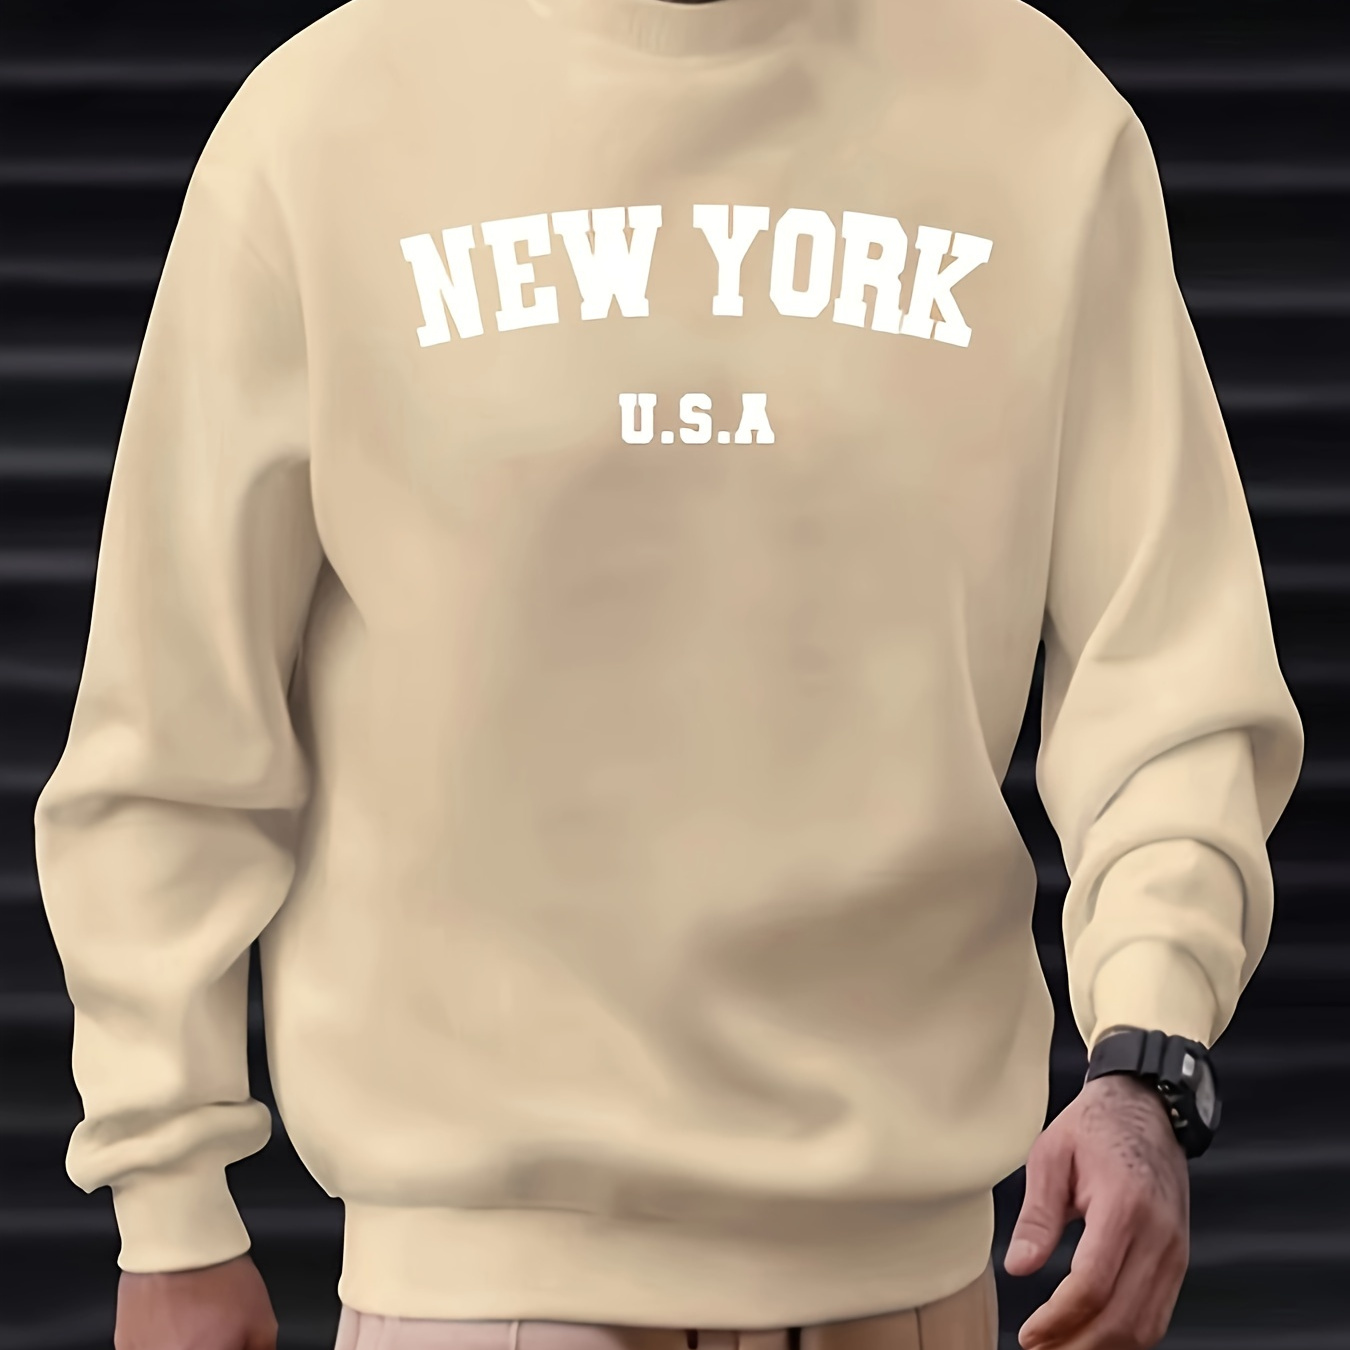 

New York Print, Sweatshirt With Long Sleeves, Men's Casual Creative Graphic Crew Neck Pullover Tops For Spring Fall And Winter